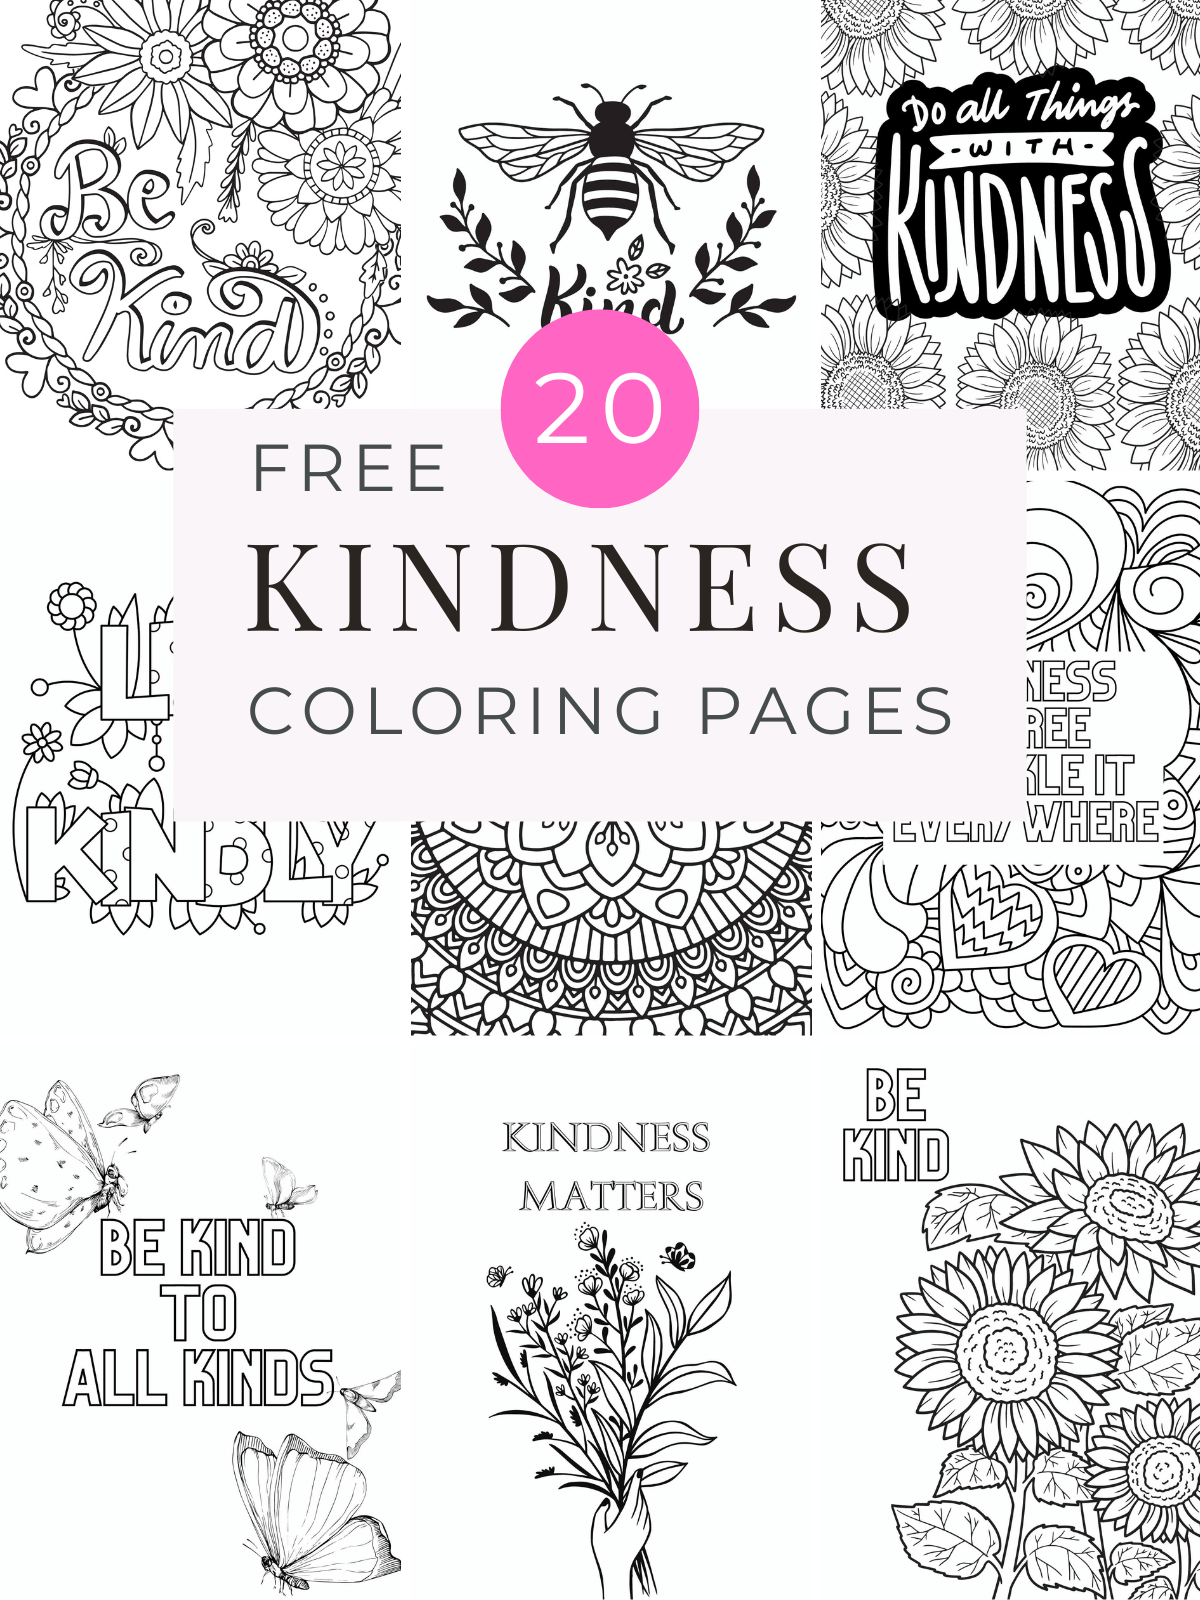 Free kindness coloring pages